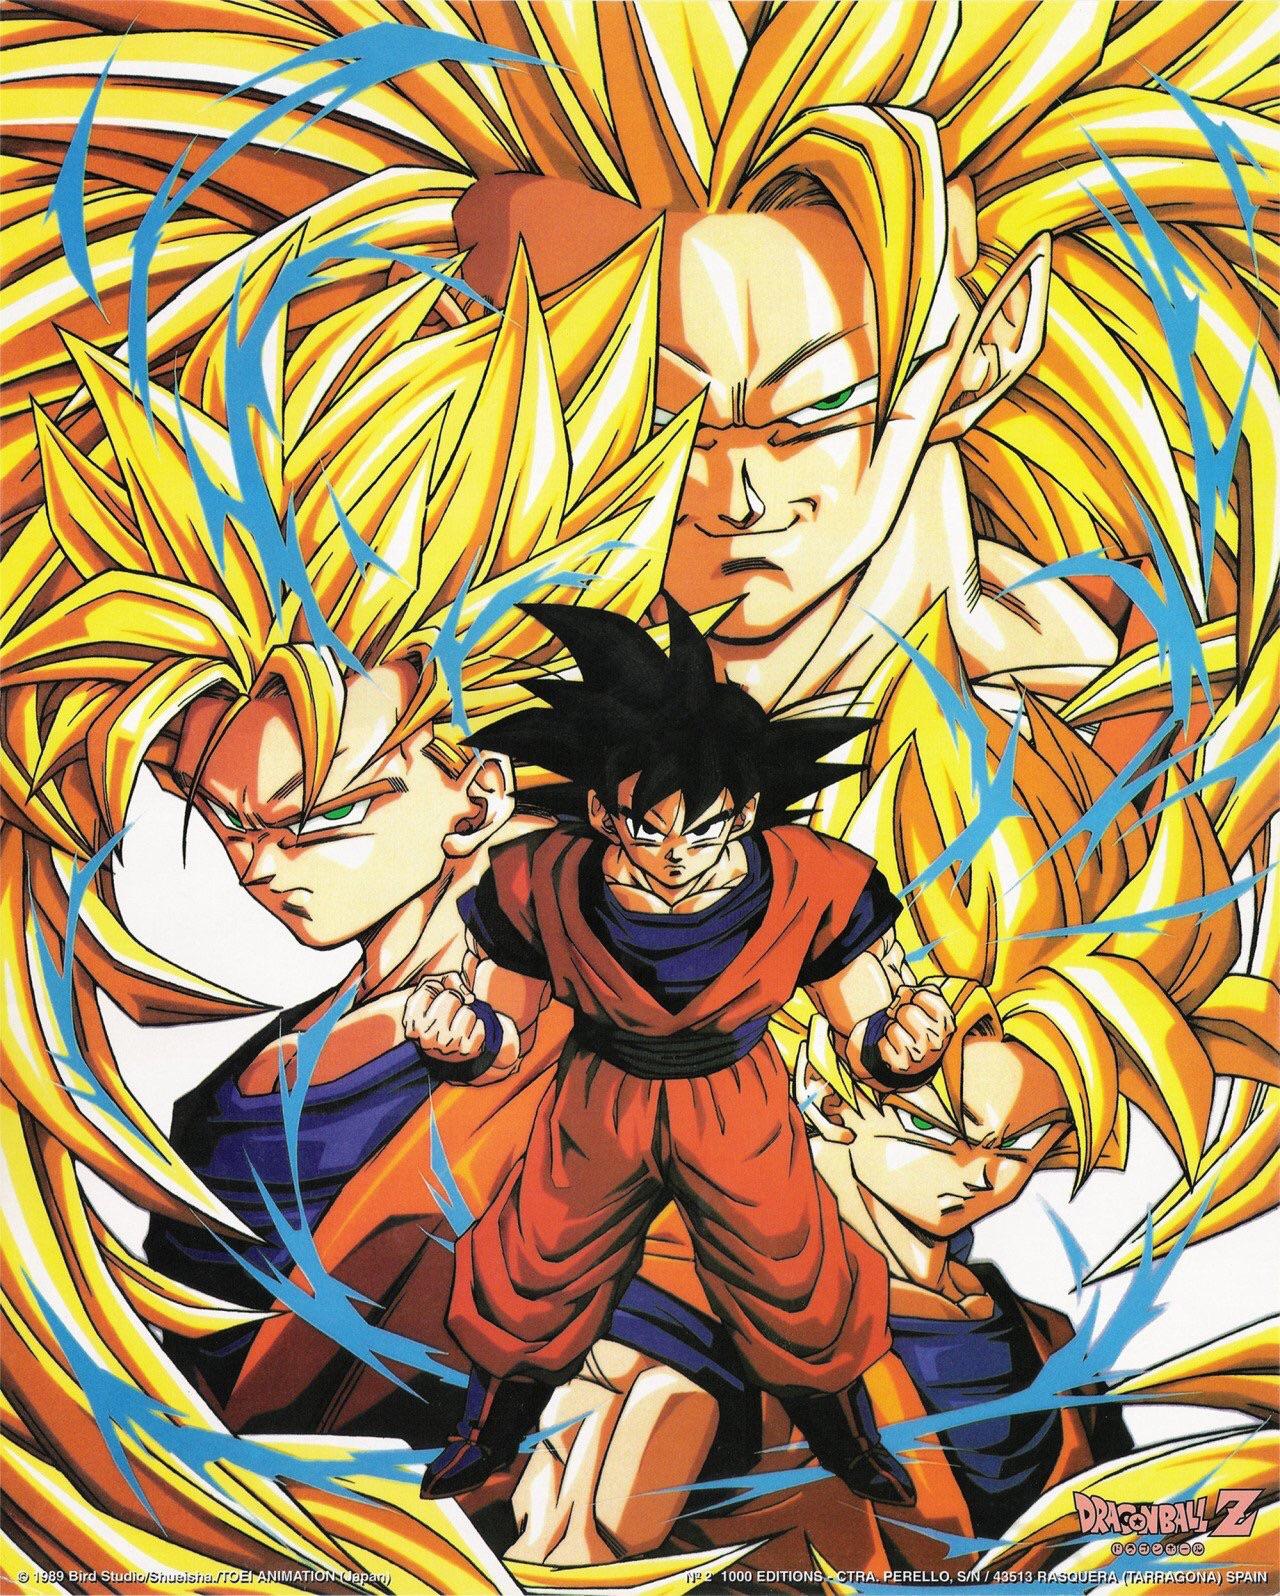 Vintage DBZ wallpaper, you're welcome